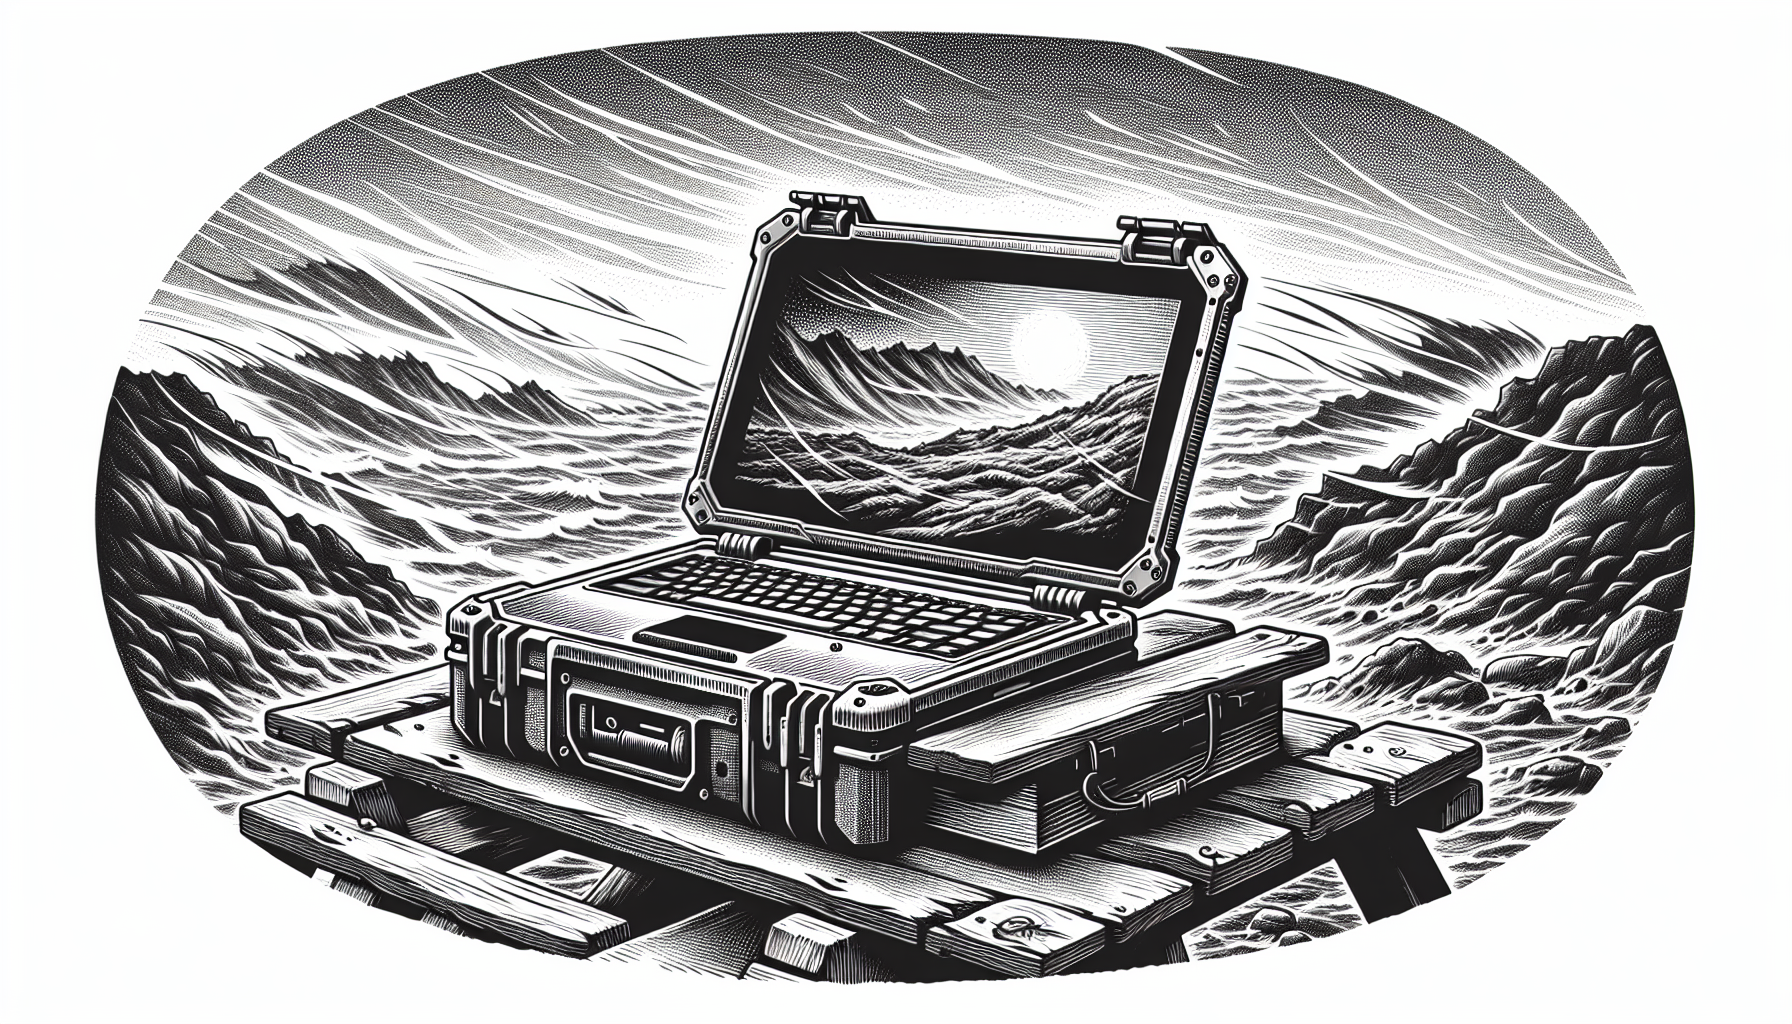 Rugged laptop in harsh environment